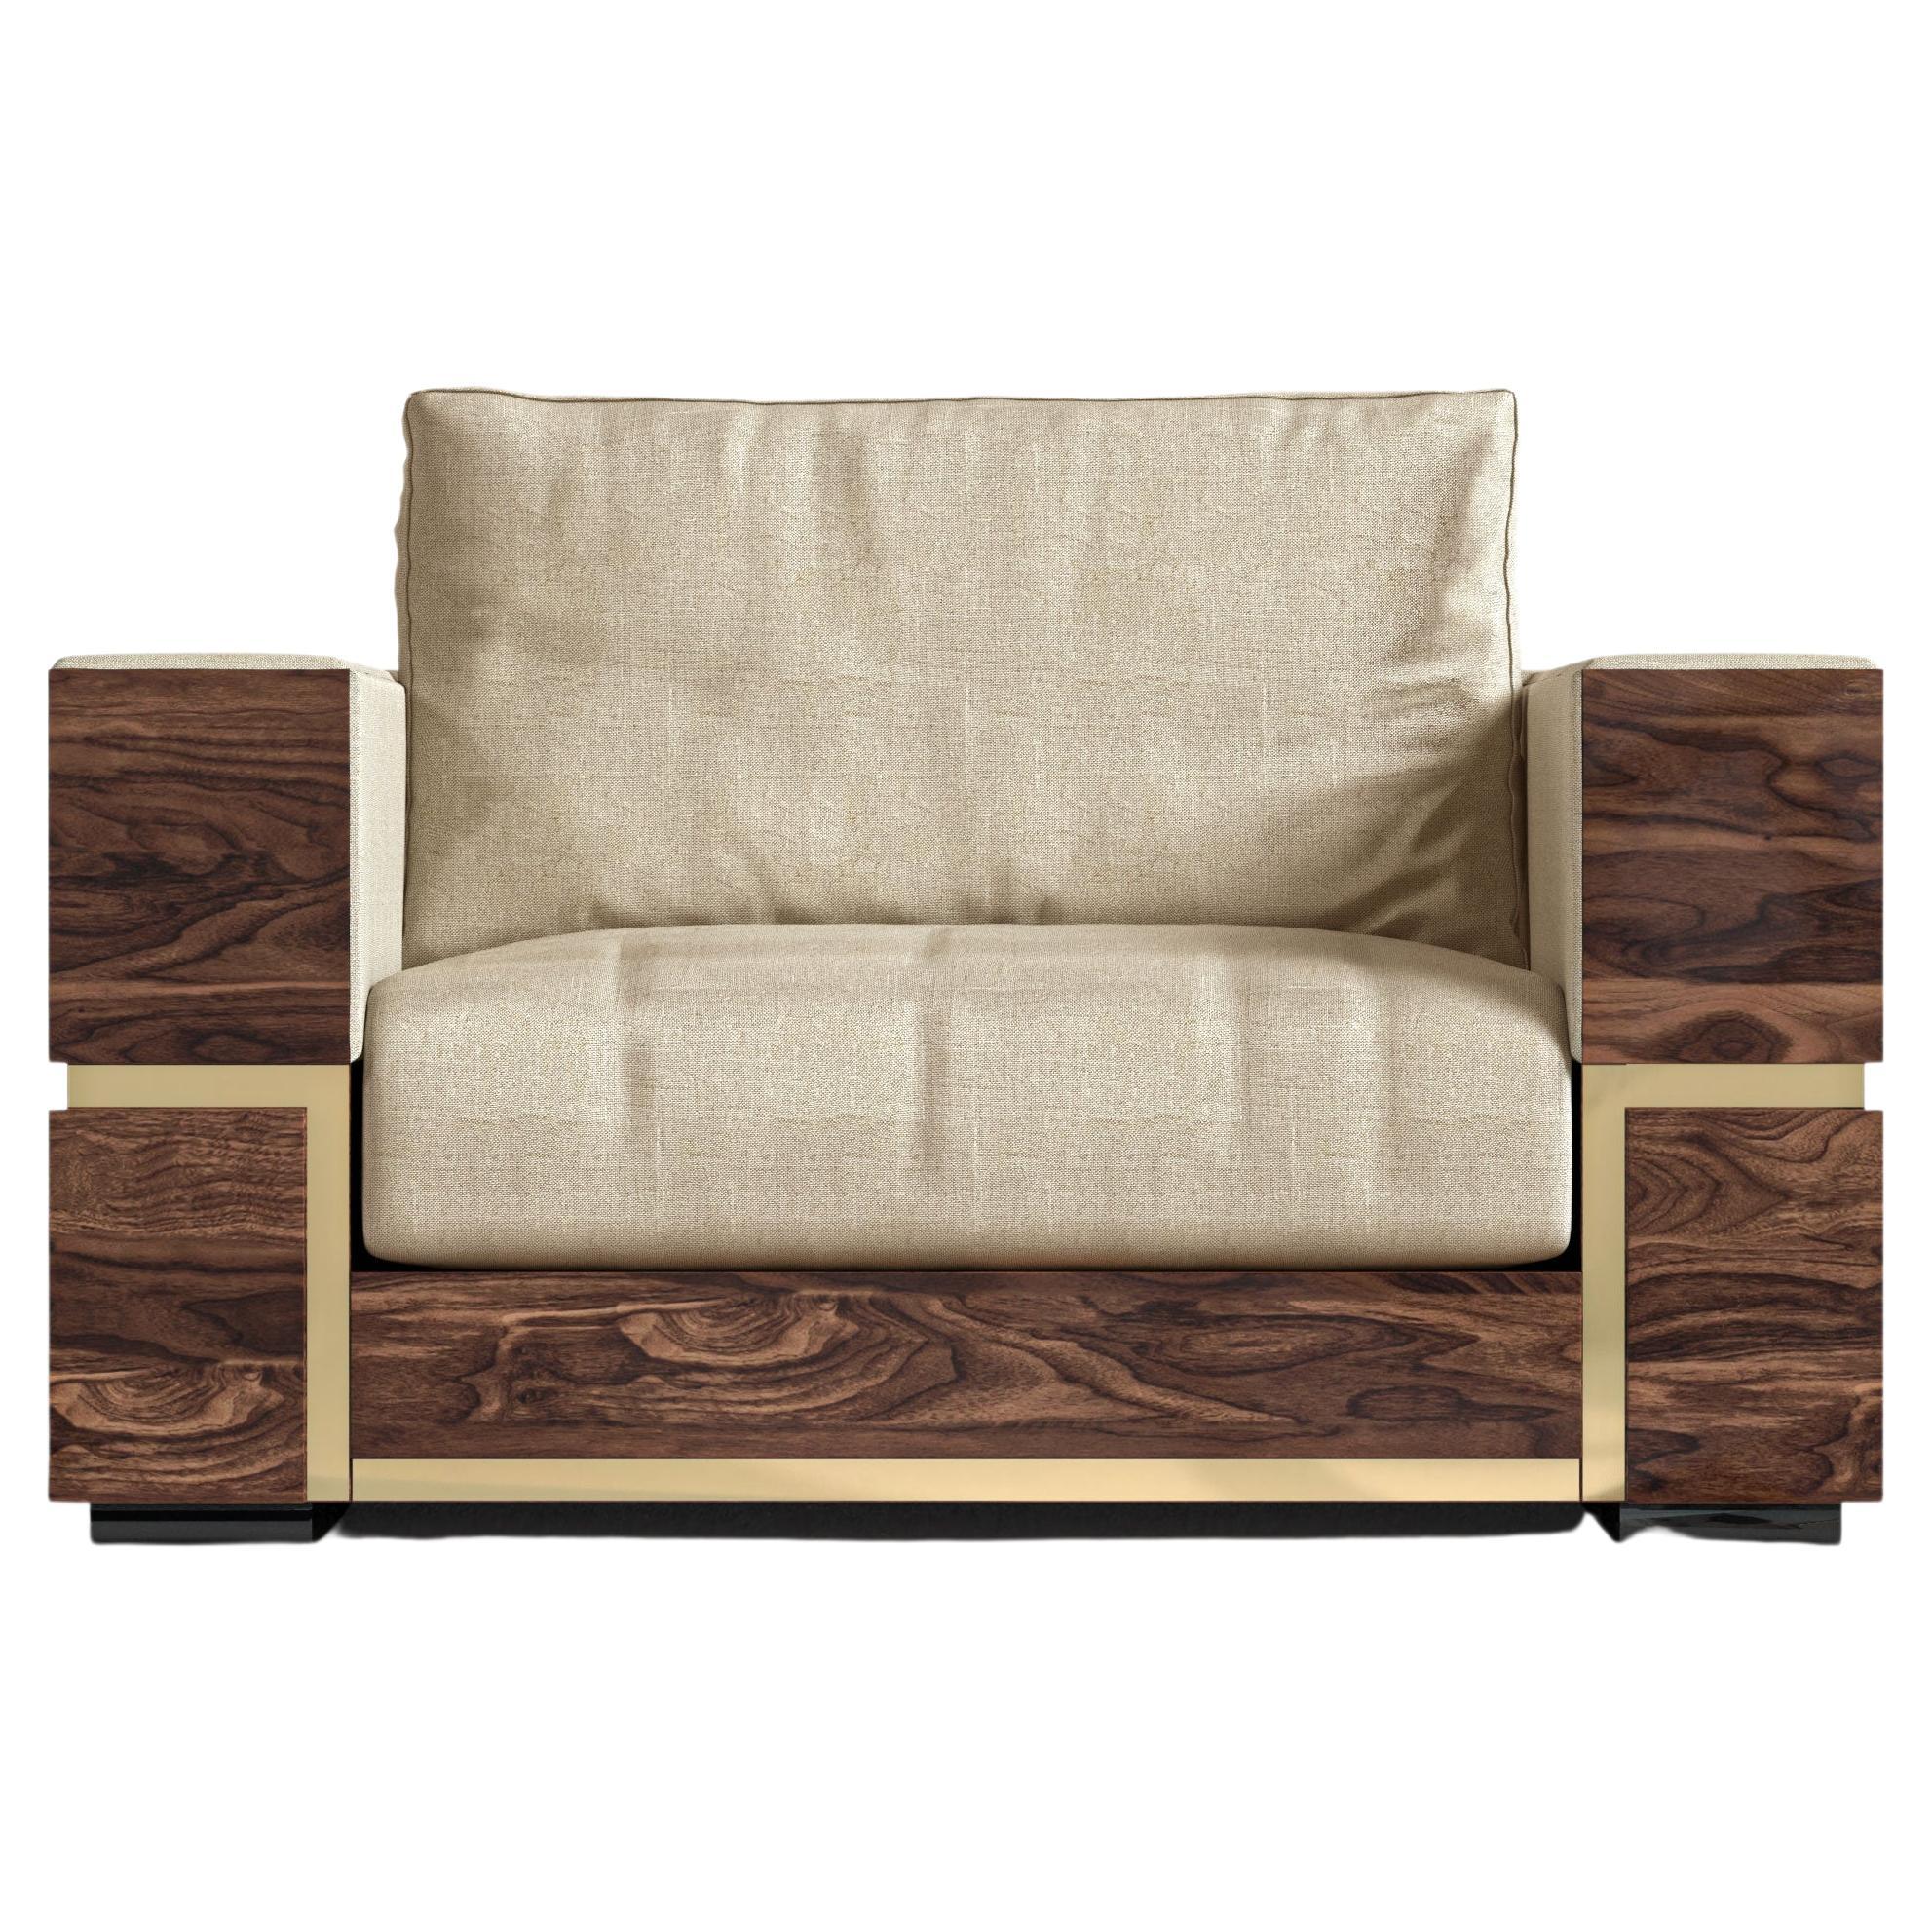 Balteus Sofa
Exuding stylish form and comfort, Balteus is a wide-width piece inspired by modern design. The gorgeous polished bronze is a beautiful contrast to the customizable soft fabric upholstery. The cushions easily seat three people in optimal